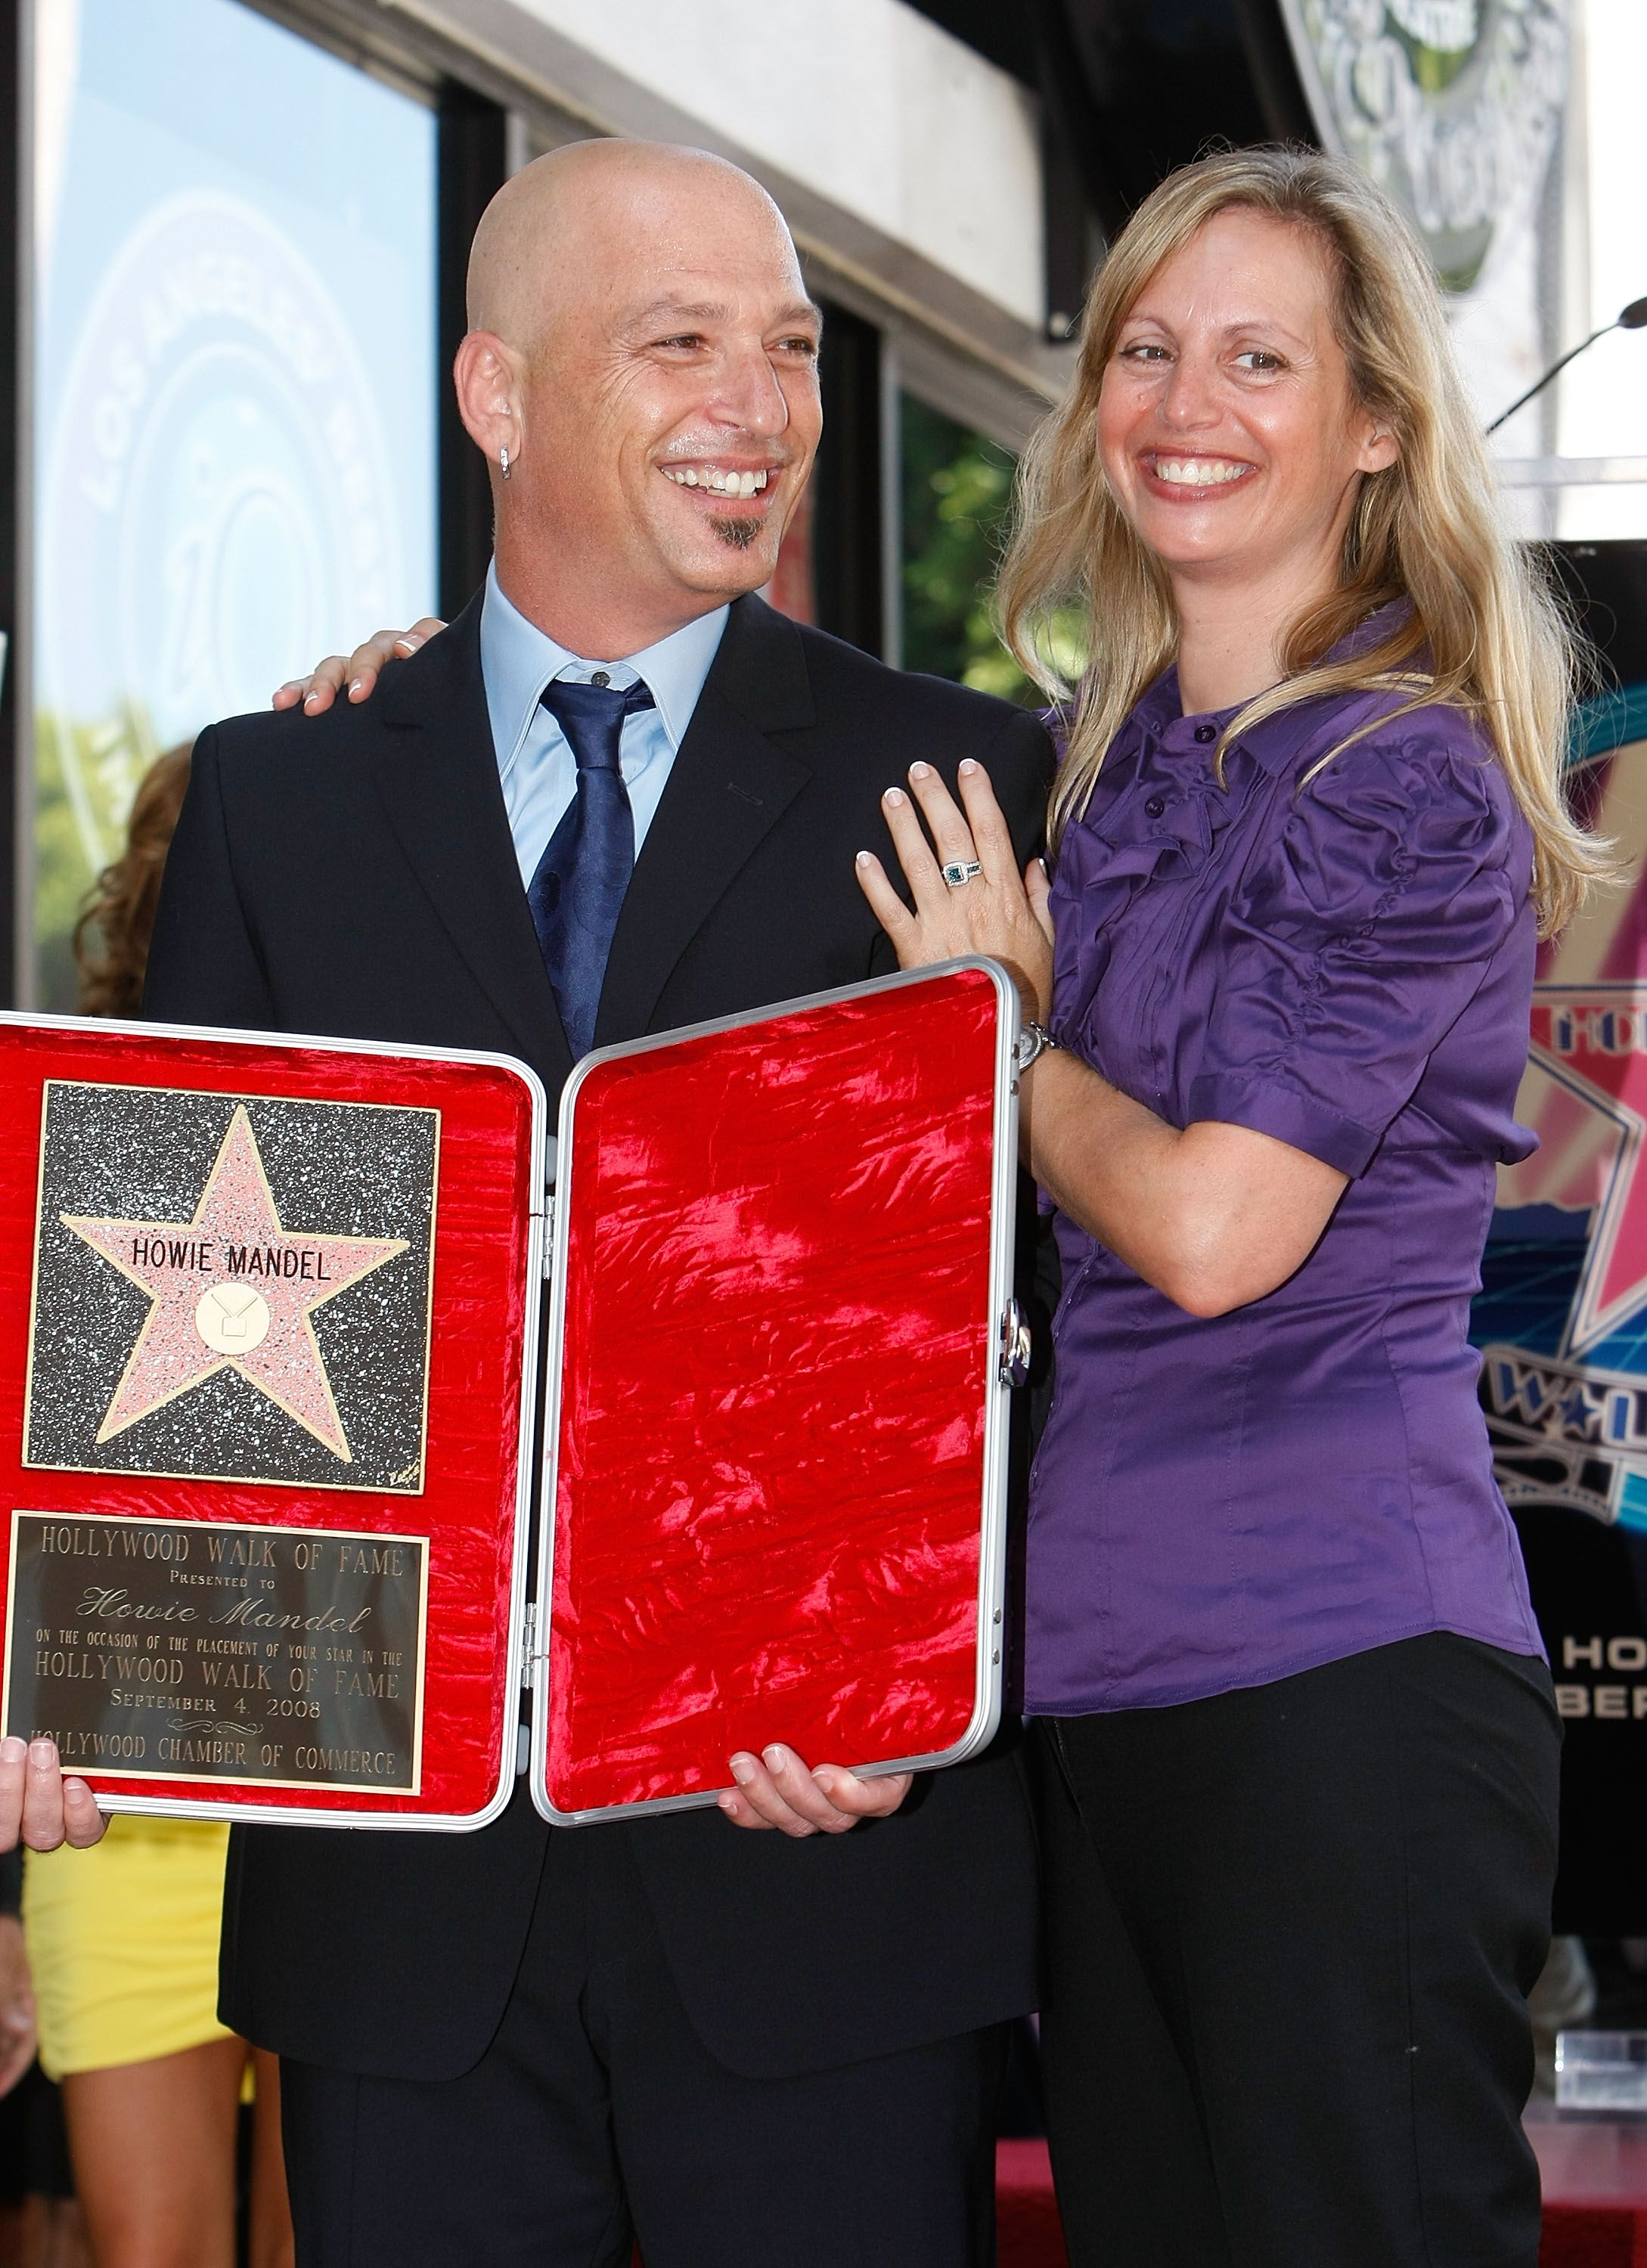 Howie Mandel and Terry Mandel at Howie's star on the Hollywood Walk of Fame on September 4, 2008 in Los Angeles, California. | Source: Getty Images